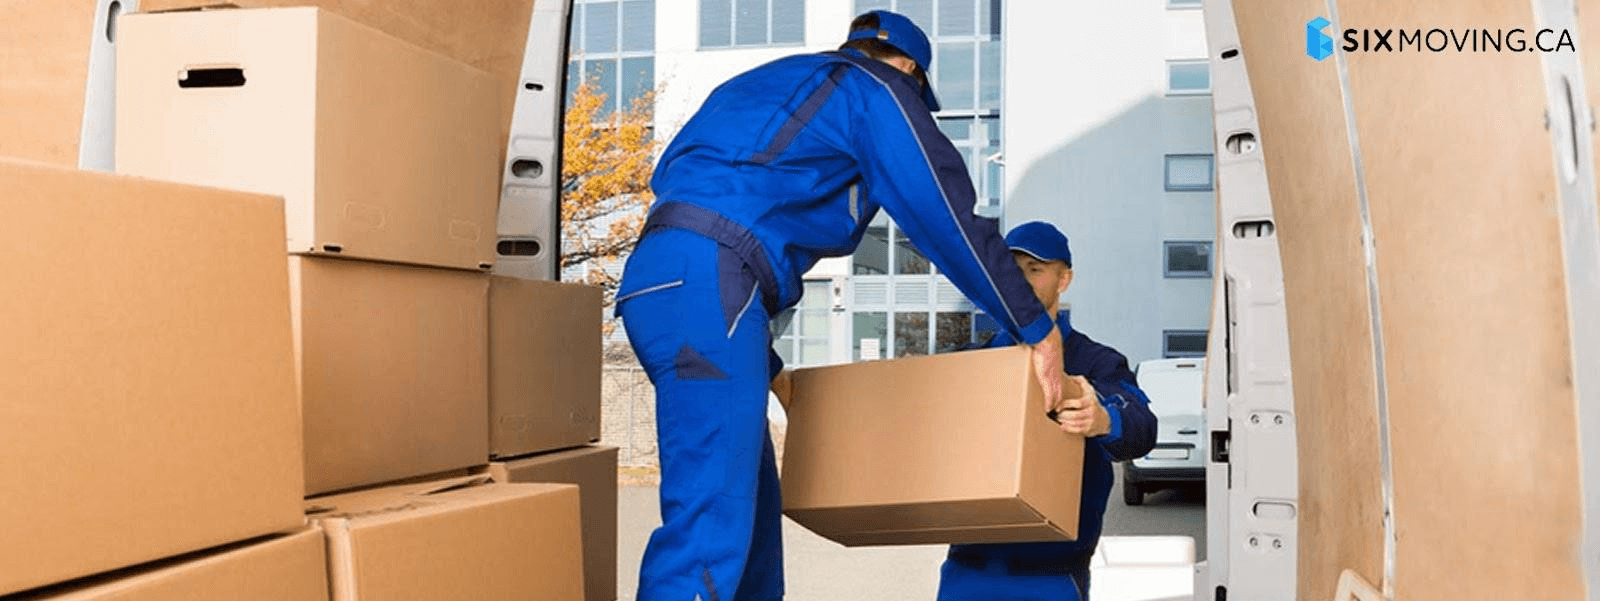 Smooth and Swift: Local Home Movers for a Quick Relocation